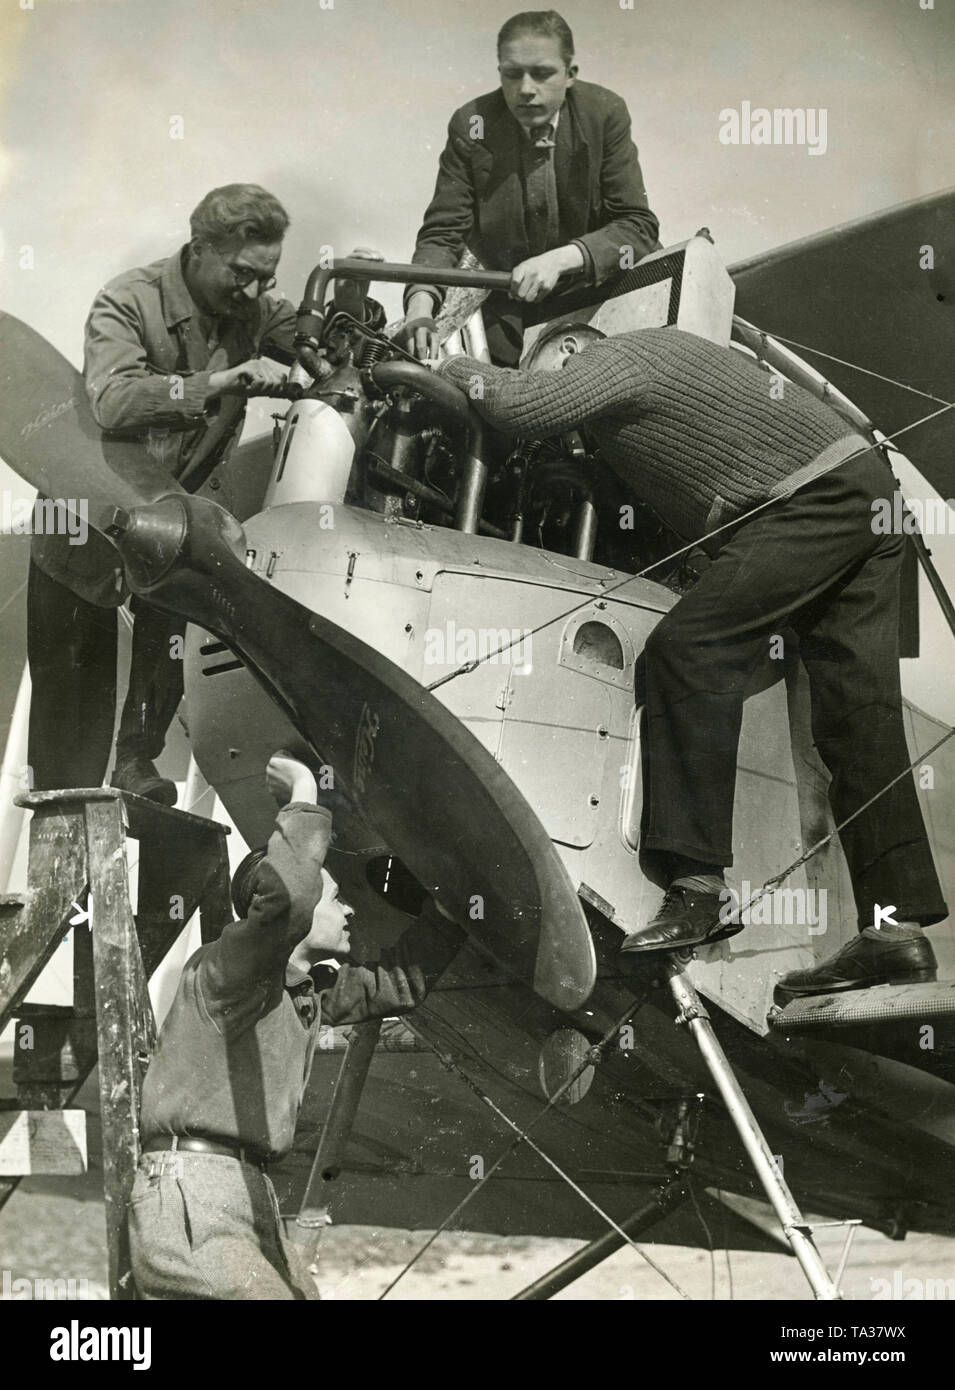 Young unemployed people repairing an aircraft engine of a pre-war biplane, which is used to launch gliders. Trainings, as here, for aircraft mechanics, often served as a job creation scheme. Stock Photo